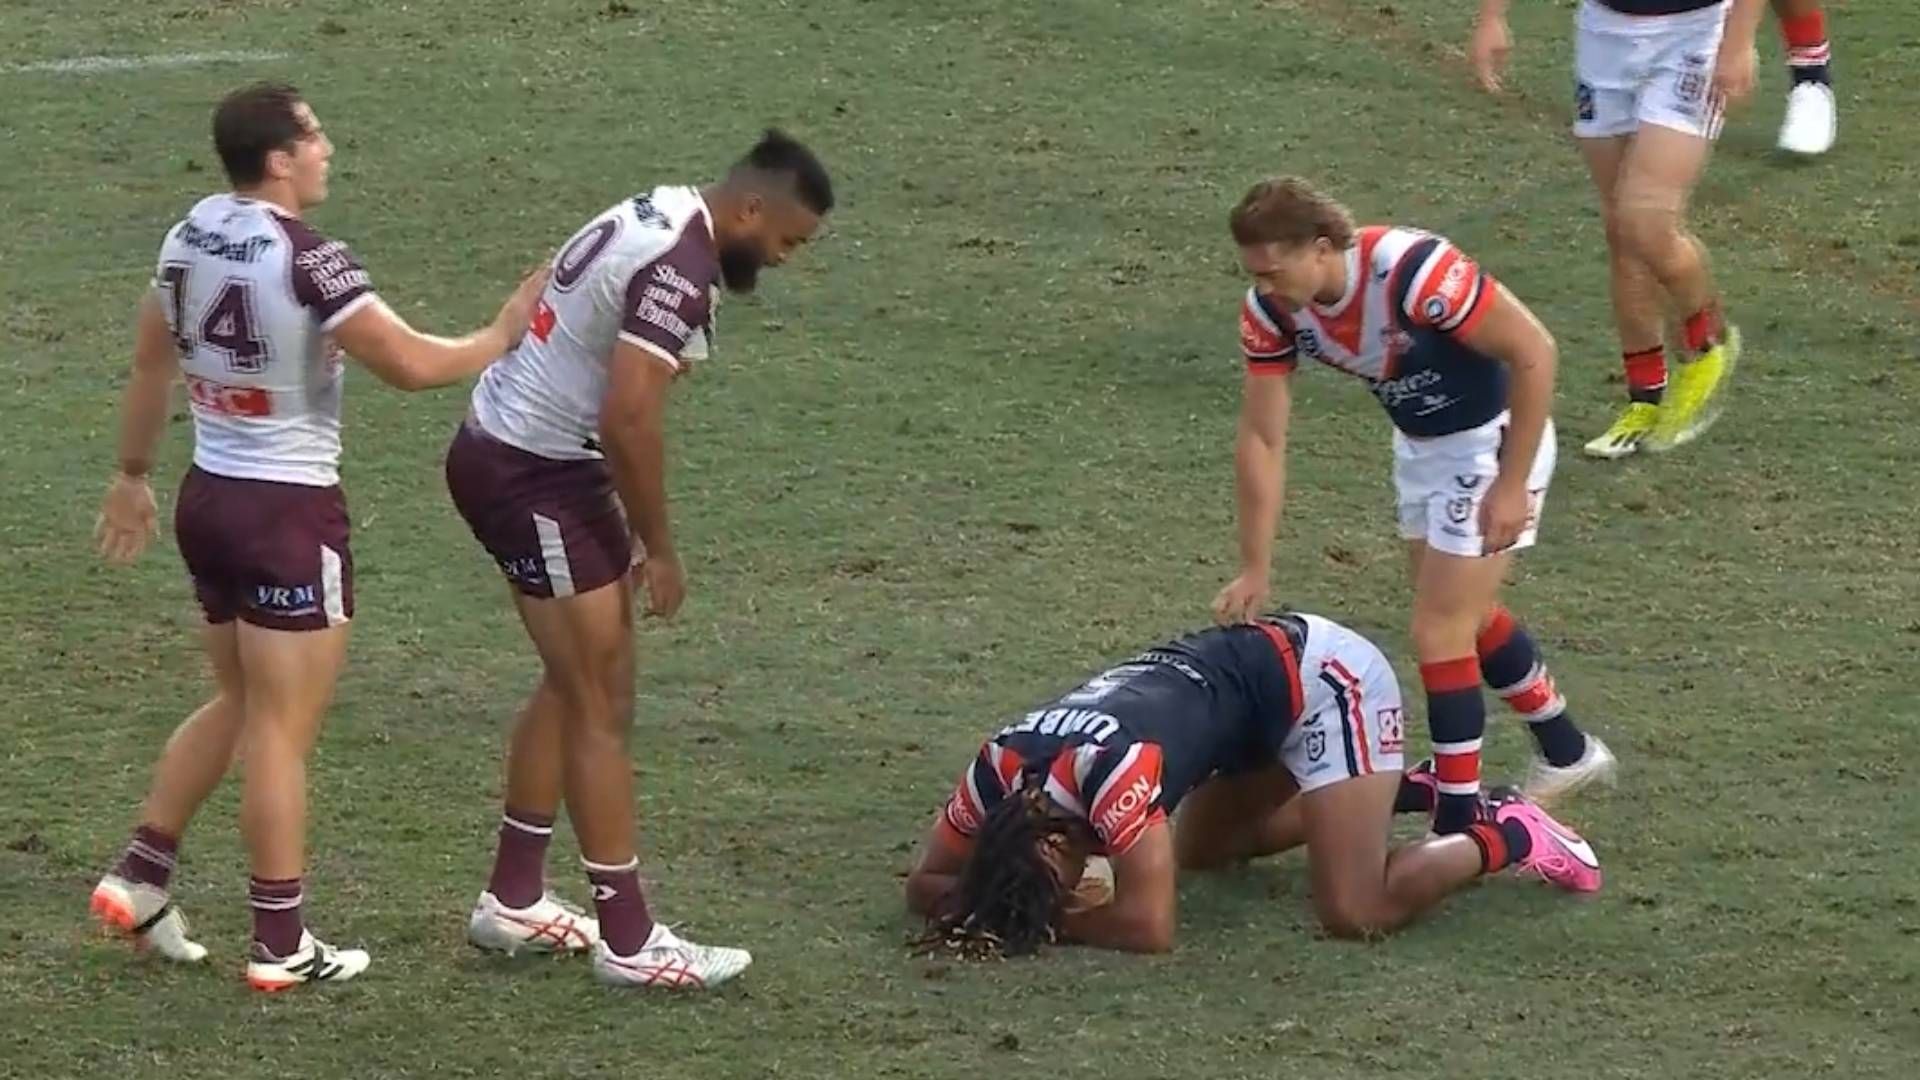 Manly forward Toafofoa Sipley facing four-game NRL suspension for crusher tackle